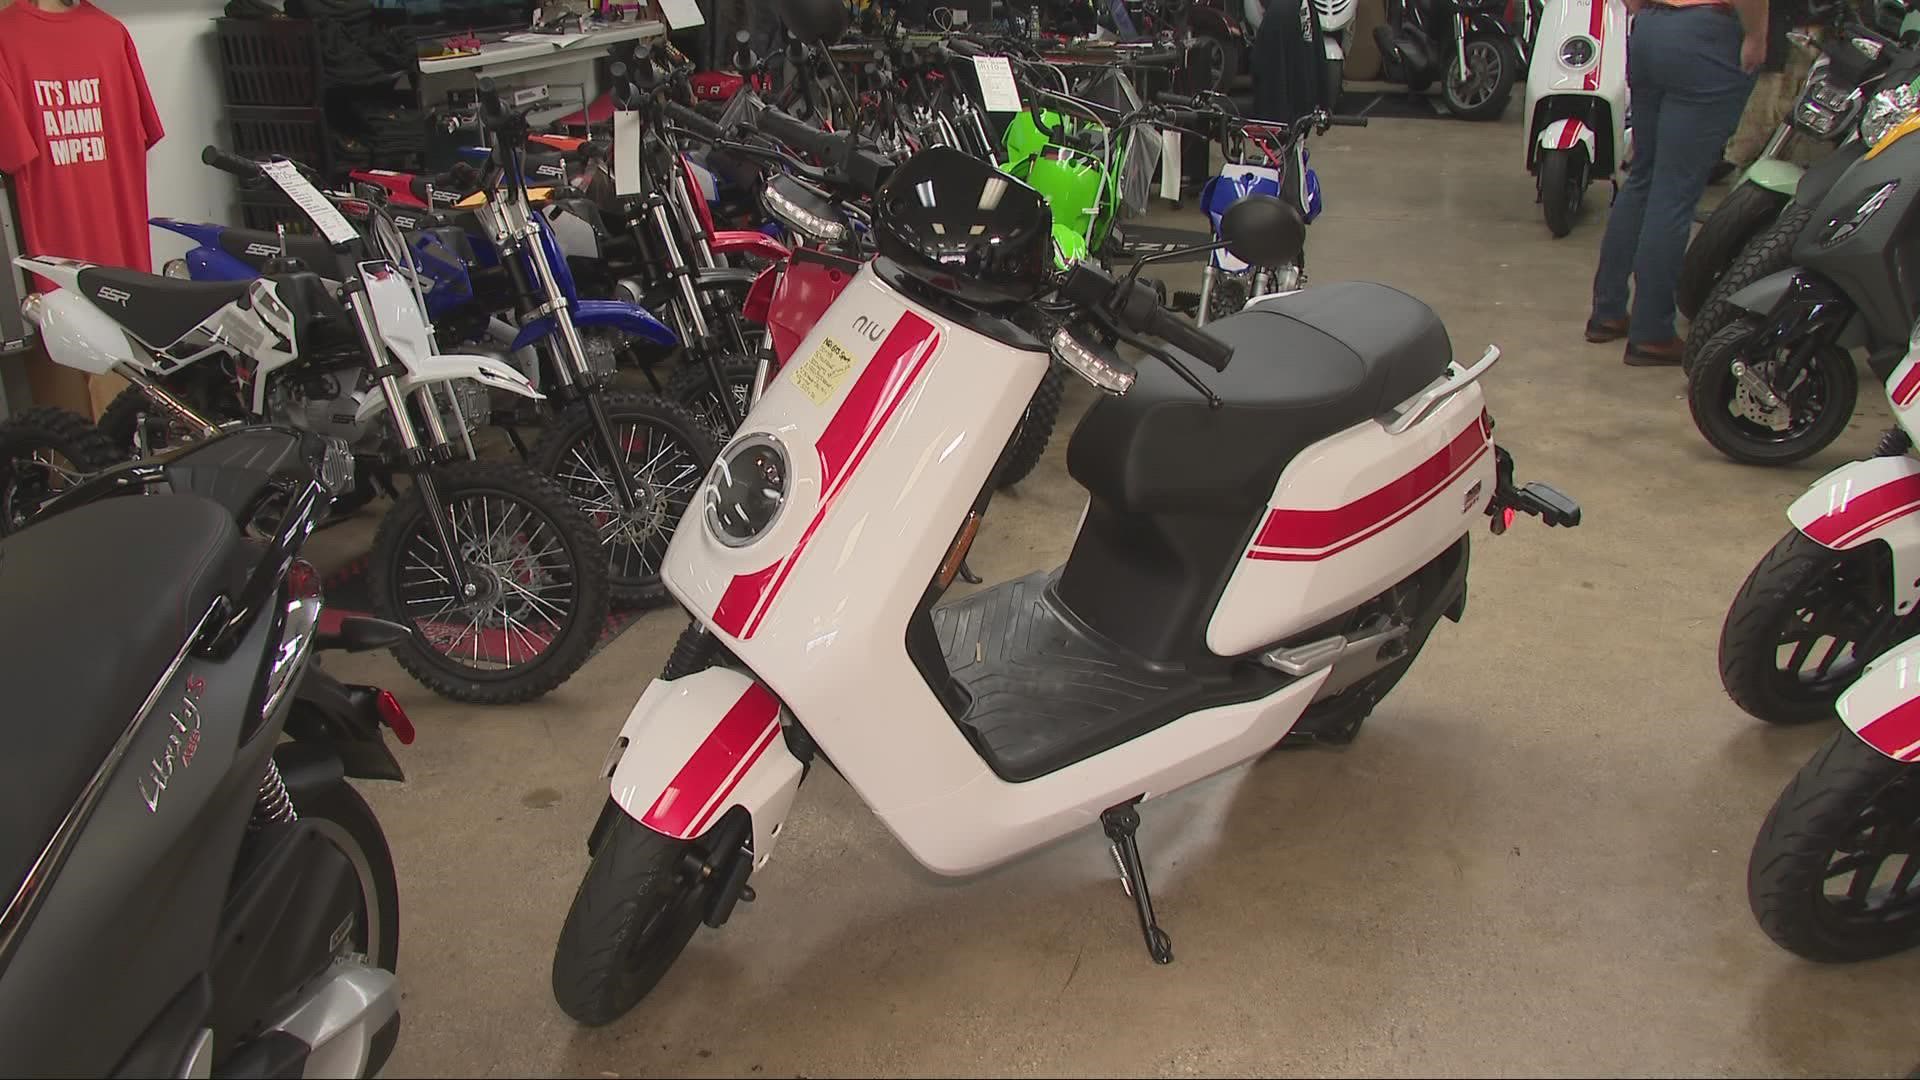 As the average price for a gallon of gas inches up each day across Northeast Ohio and the nation, scooter sales have hit an all time high. Neil Fischer reports.